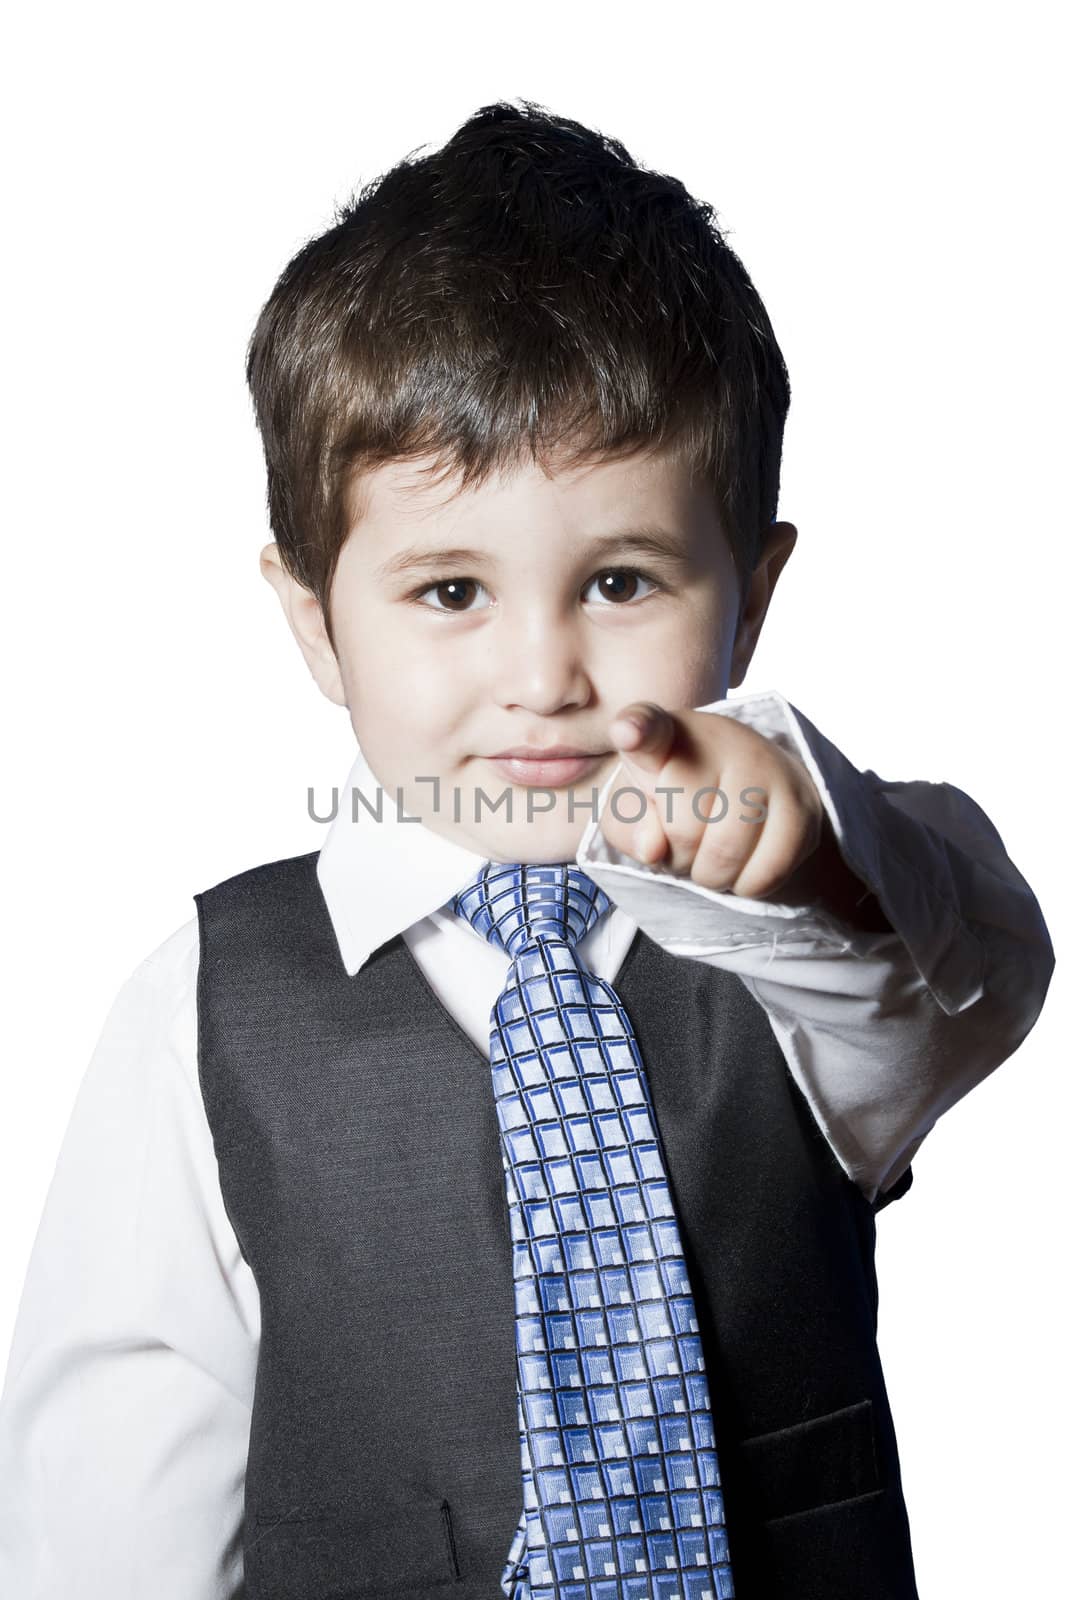 A small boy in the studio, dressed up in a suit and pretending t by FernandoCortes